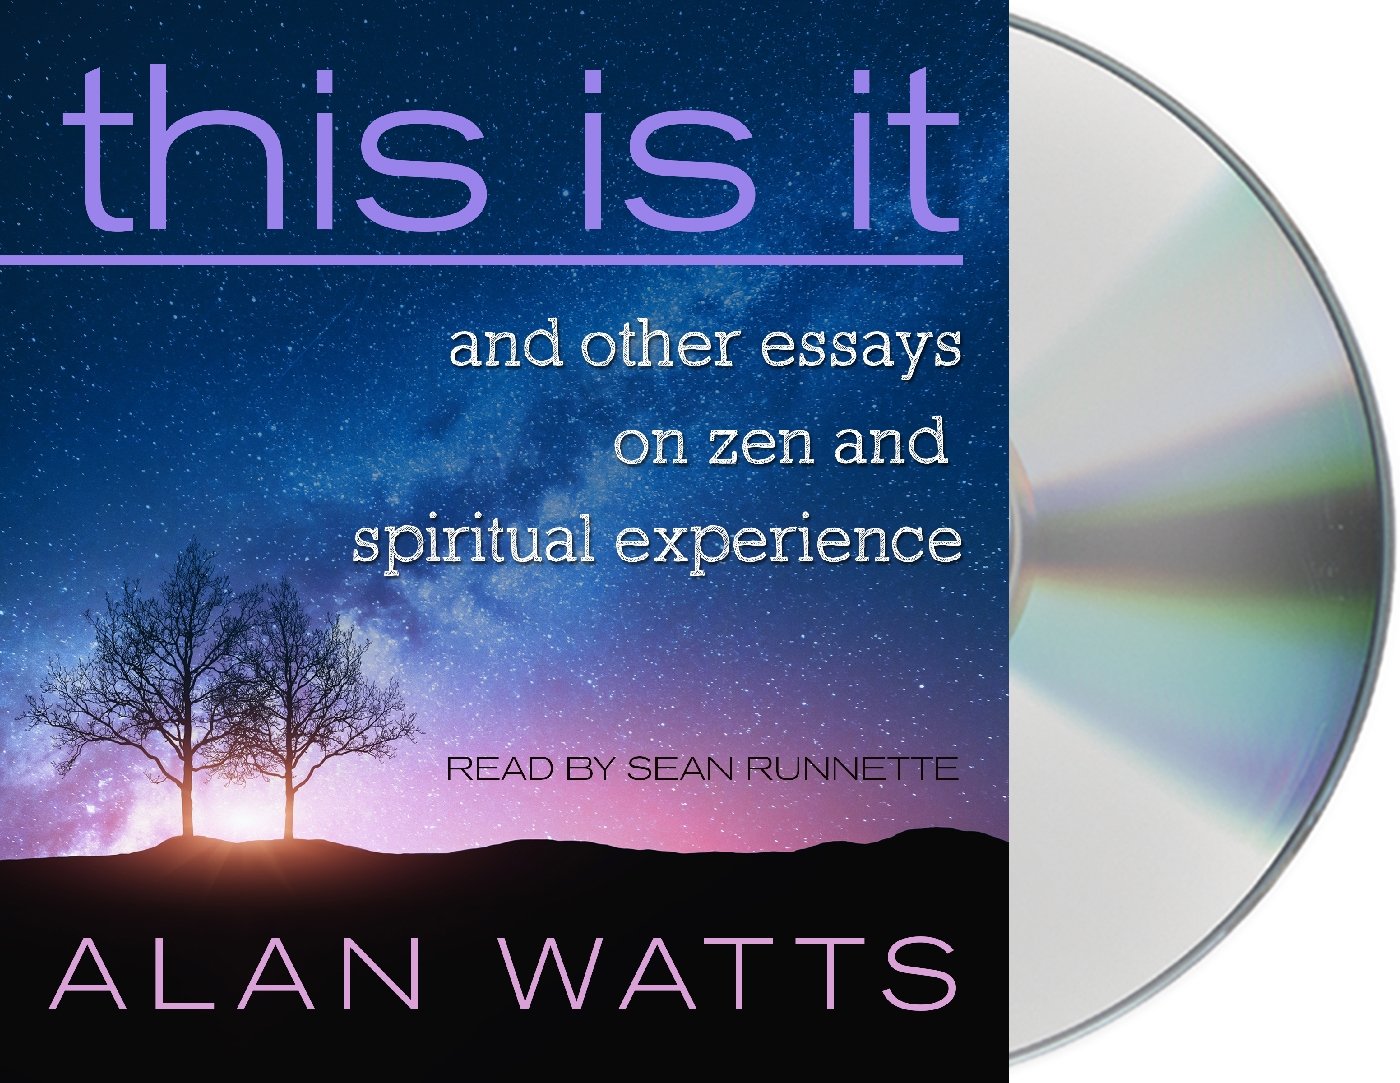 Alan Watts, Sean Runnette - This Is It: And Other Essays on Zen and Spiritual Experience